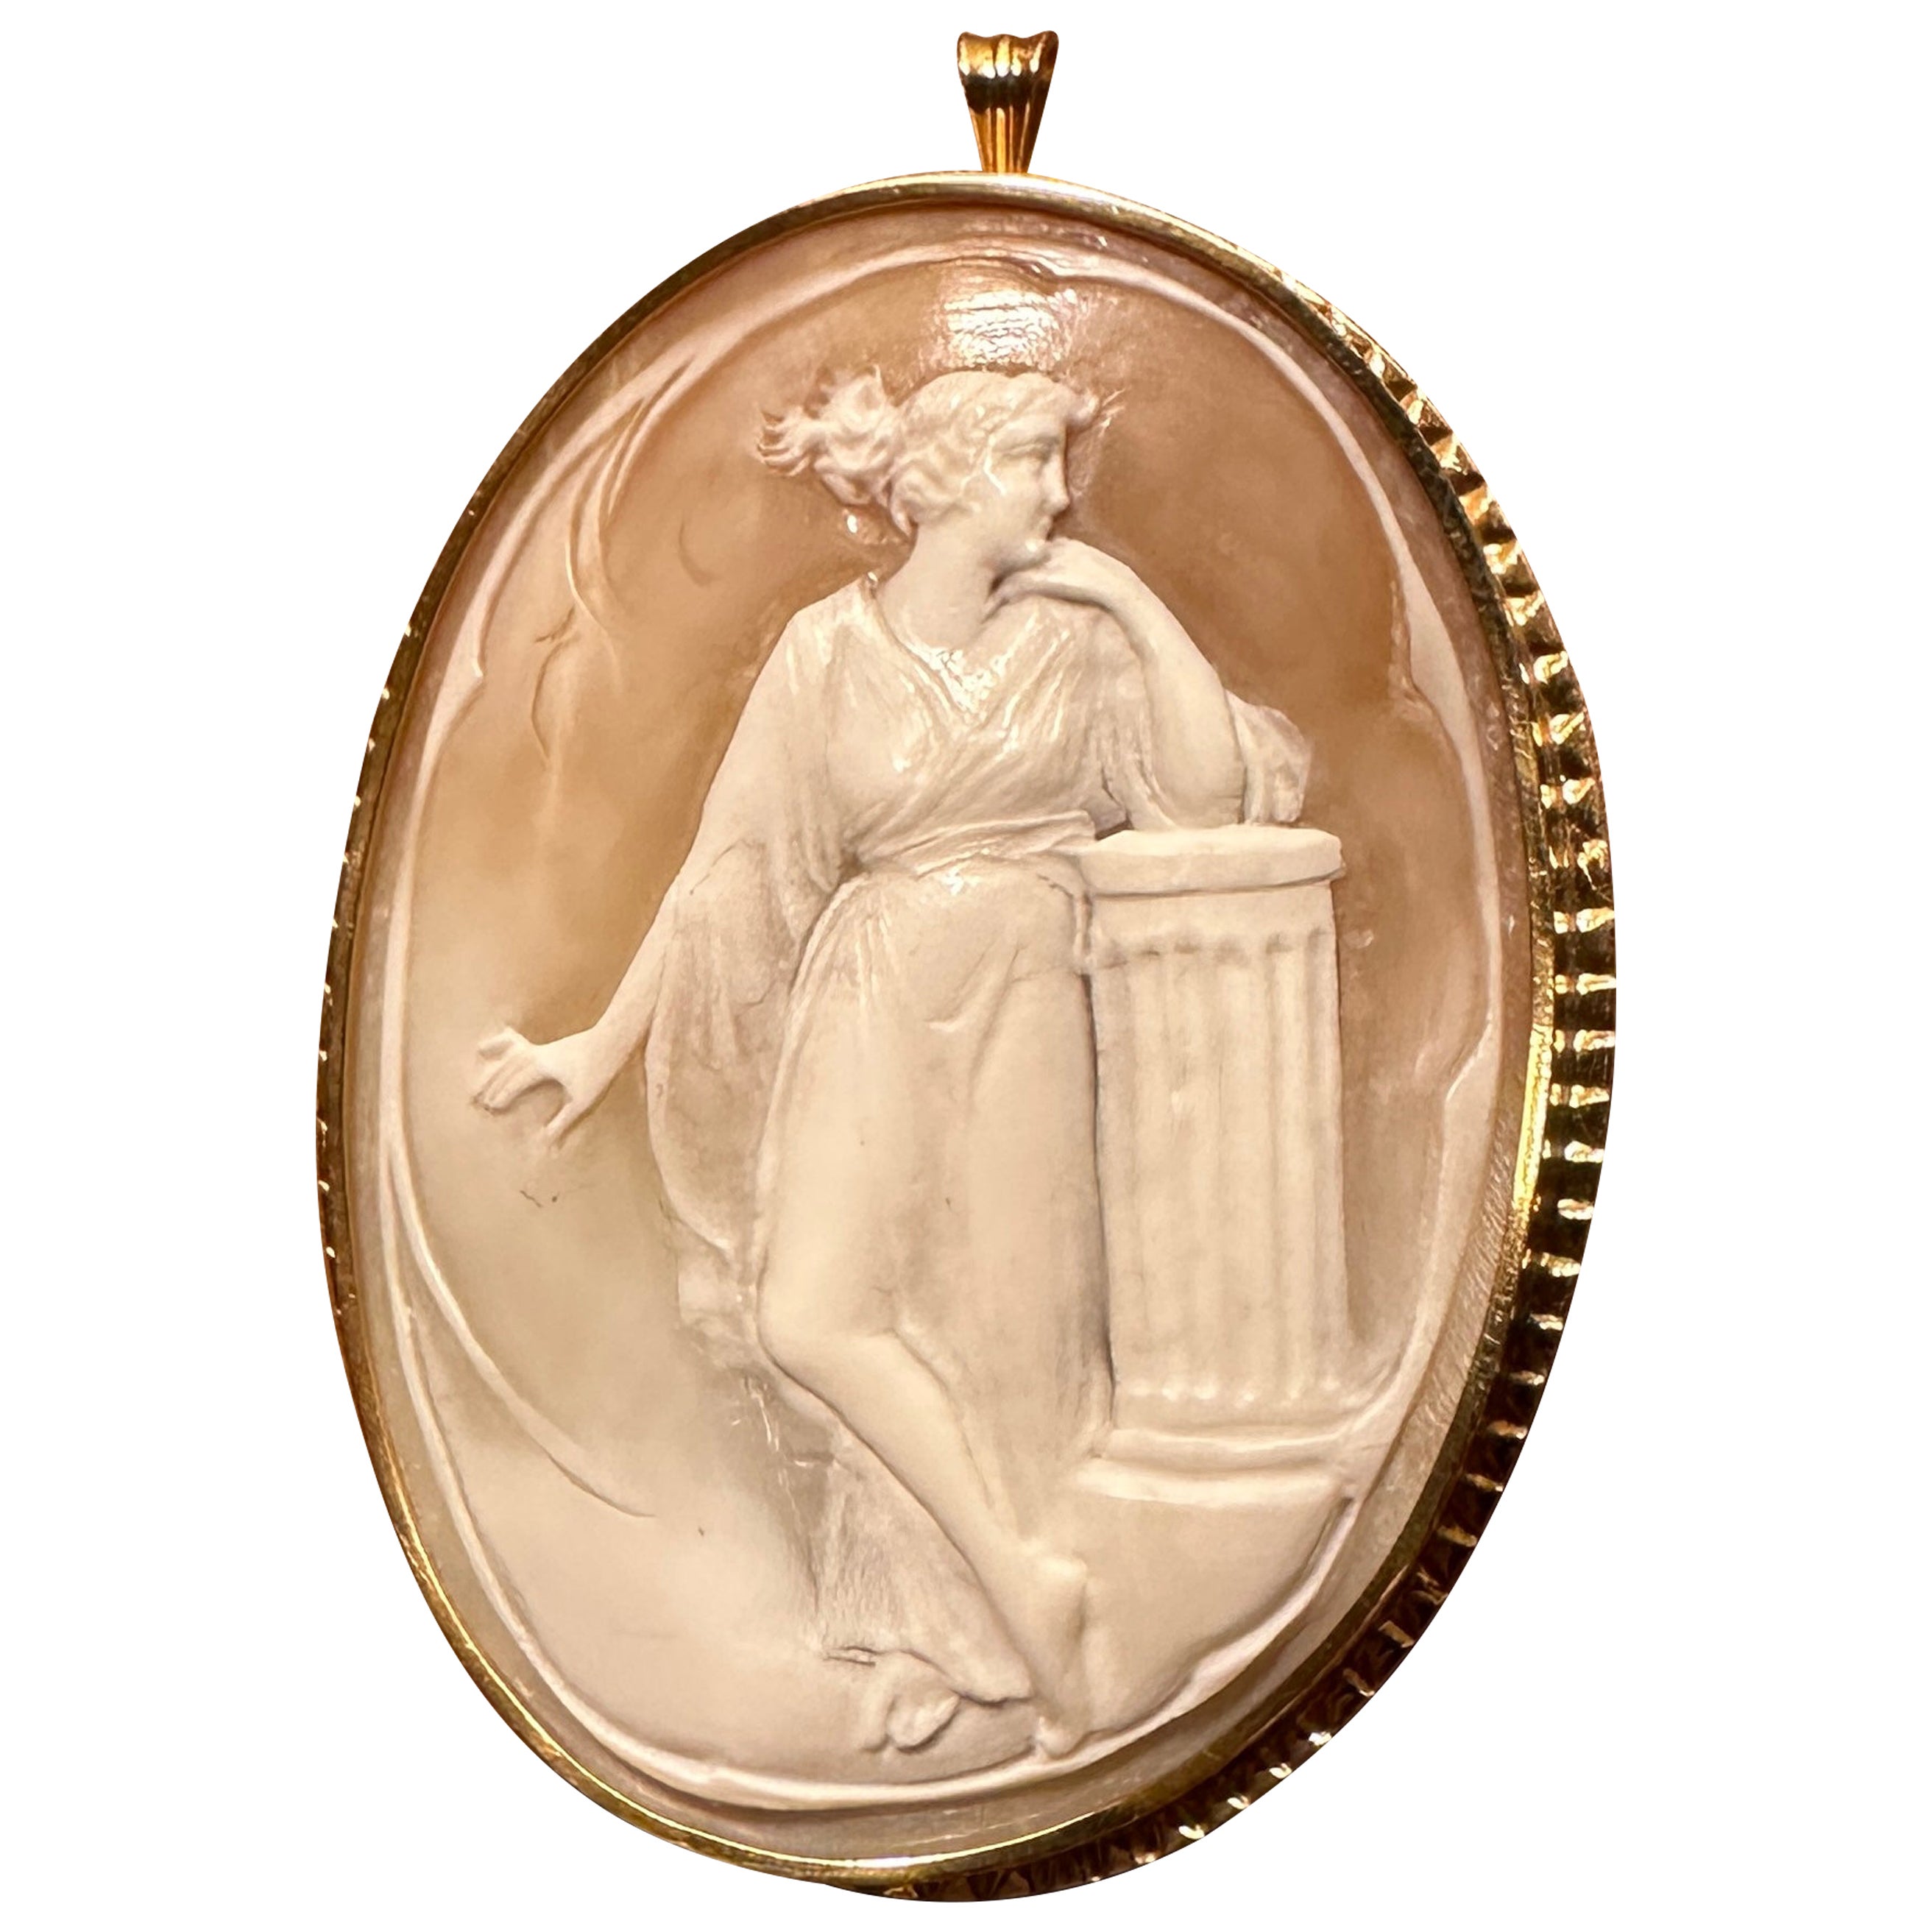 Goddess Cameo Pendant Brooch Necklace 18 Karat Gold Classical Antique 2.5 Inches For Sale